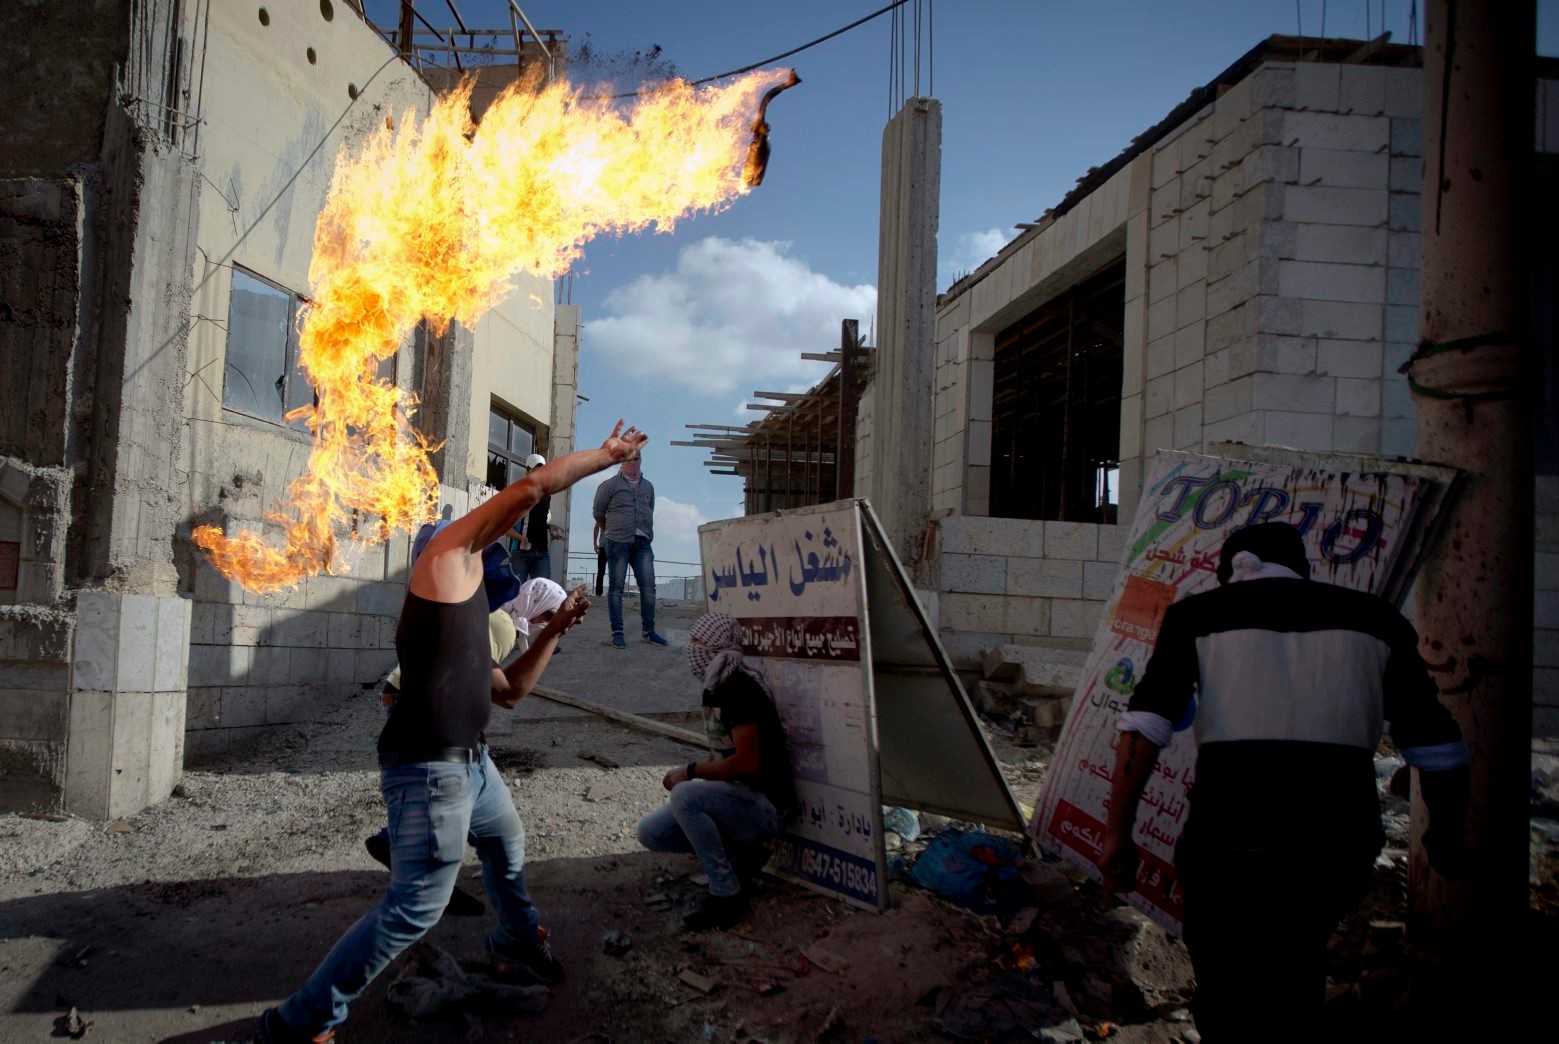 A Palestinian throws a Molotov cocktail during clashes with Israeli troops at Qalandia checkpoint between Jerusalem and the West Bank city of Ramallah, Tuesday, Oct. 6, 2015. A new generation of angry, disillusioned Palestinians is driving the current wave of clashes with Israeli forces: They are too young to remember the hardships of life during Israel's clampdown on the last major uprising, and after years of nationalist Israeli governments many have lost faith in statehood through negotiations and believe Israel only understands force. (AP Photo/Majdi Mohammed) Mideast Palestinians Young and Angry